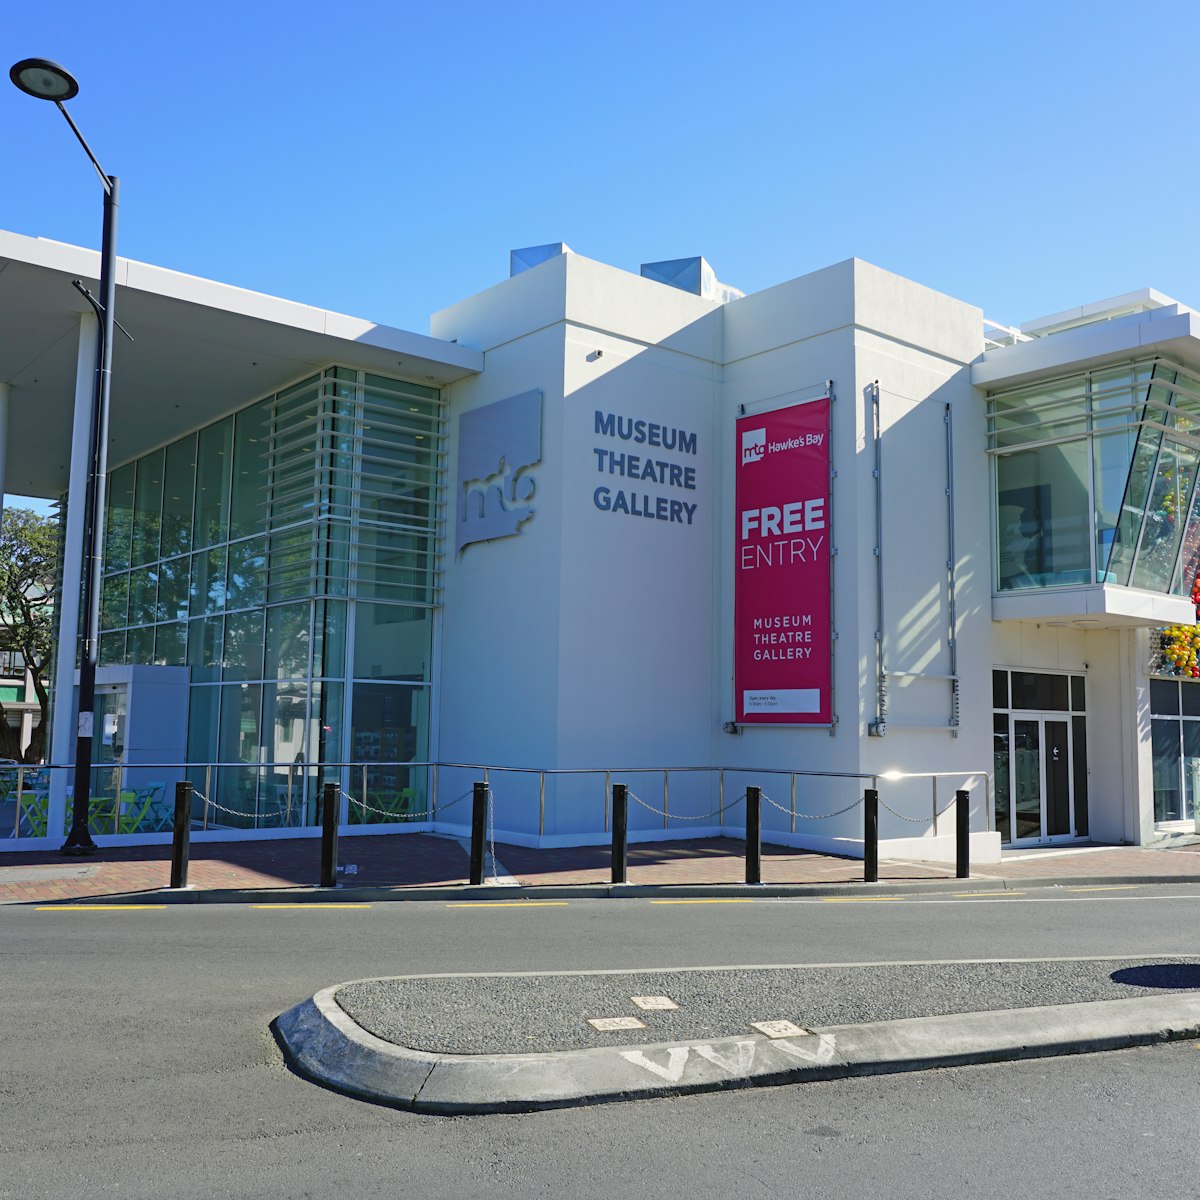 The Museum Theatre Gallery (MTG) on Hawke’s Bay in Napier, New Zealand.